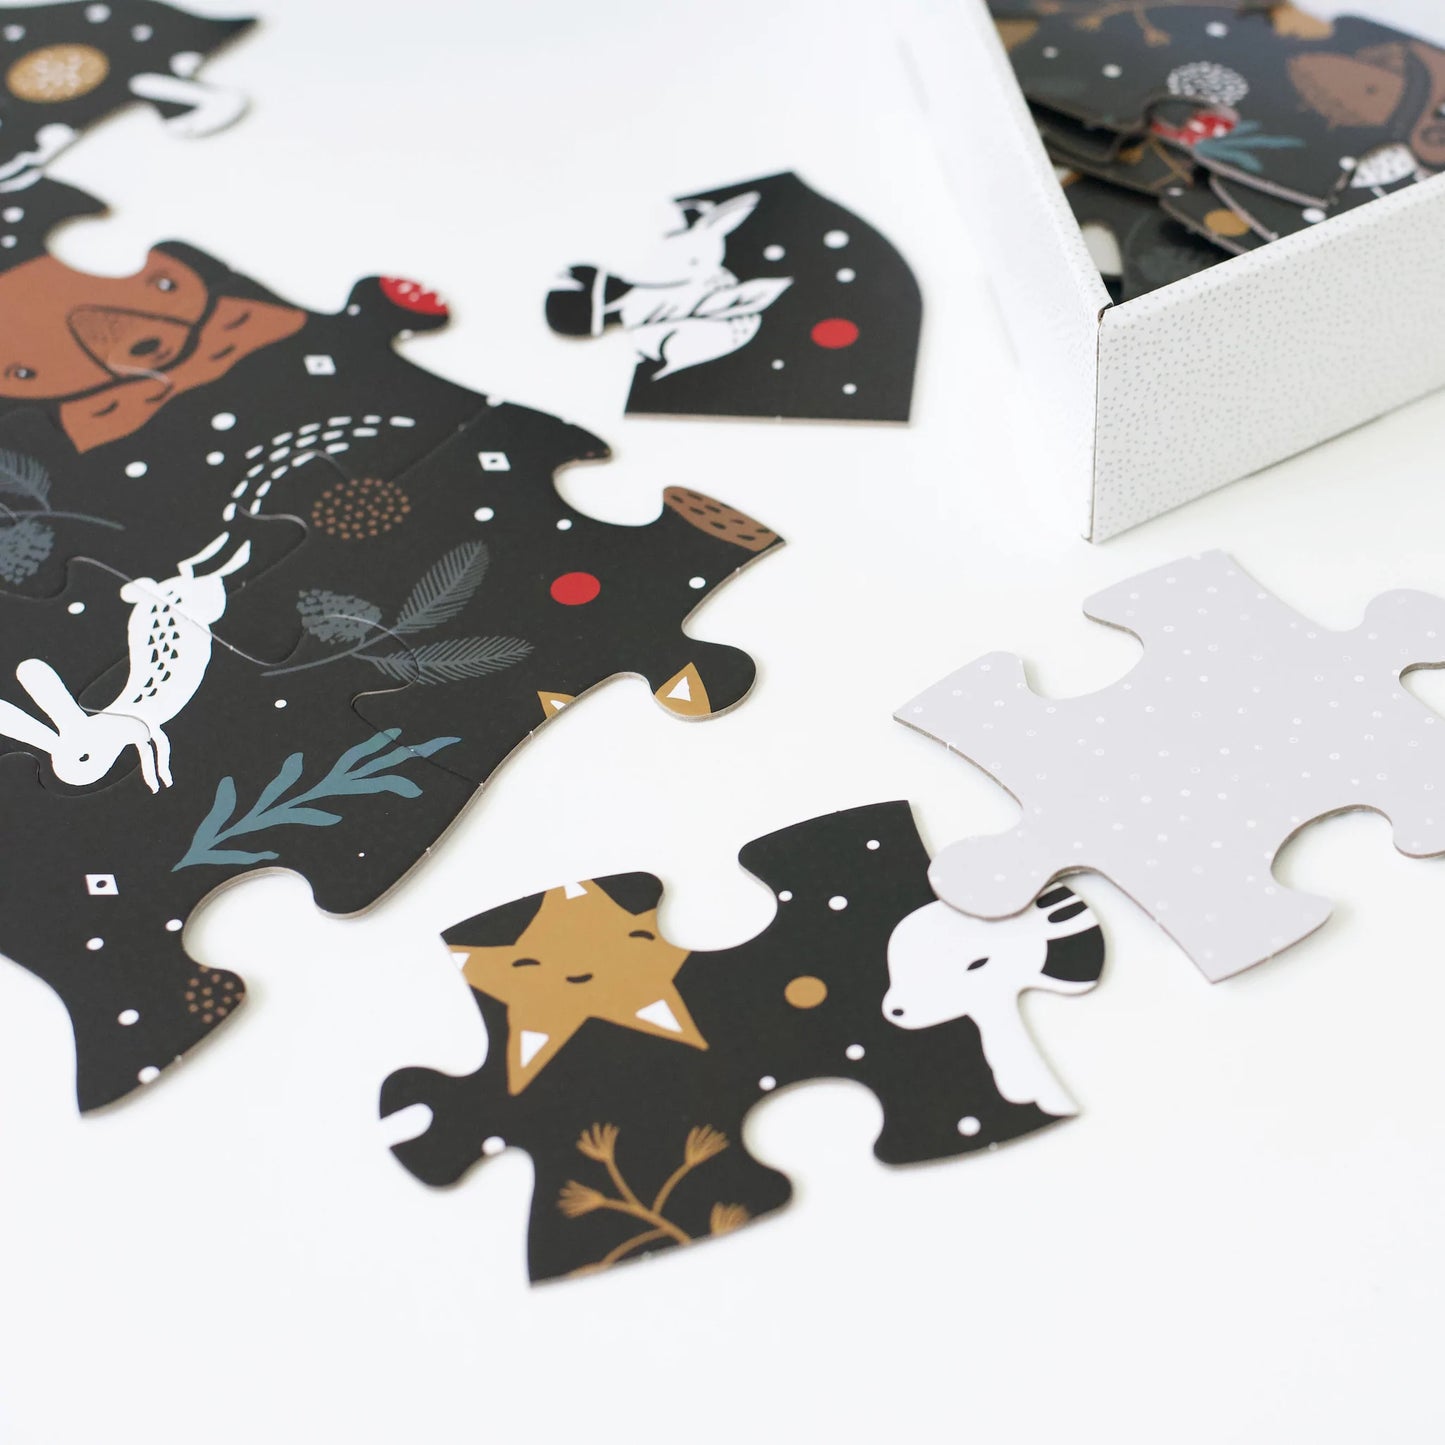 Wee Gallery - Christmas Tree Puzzle